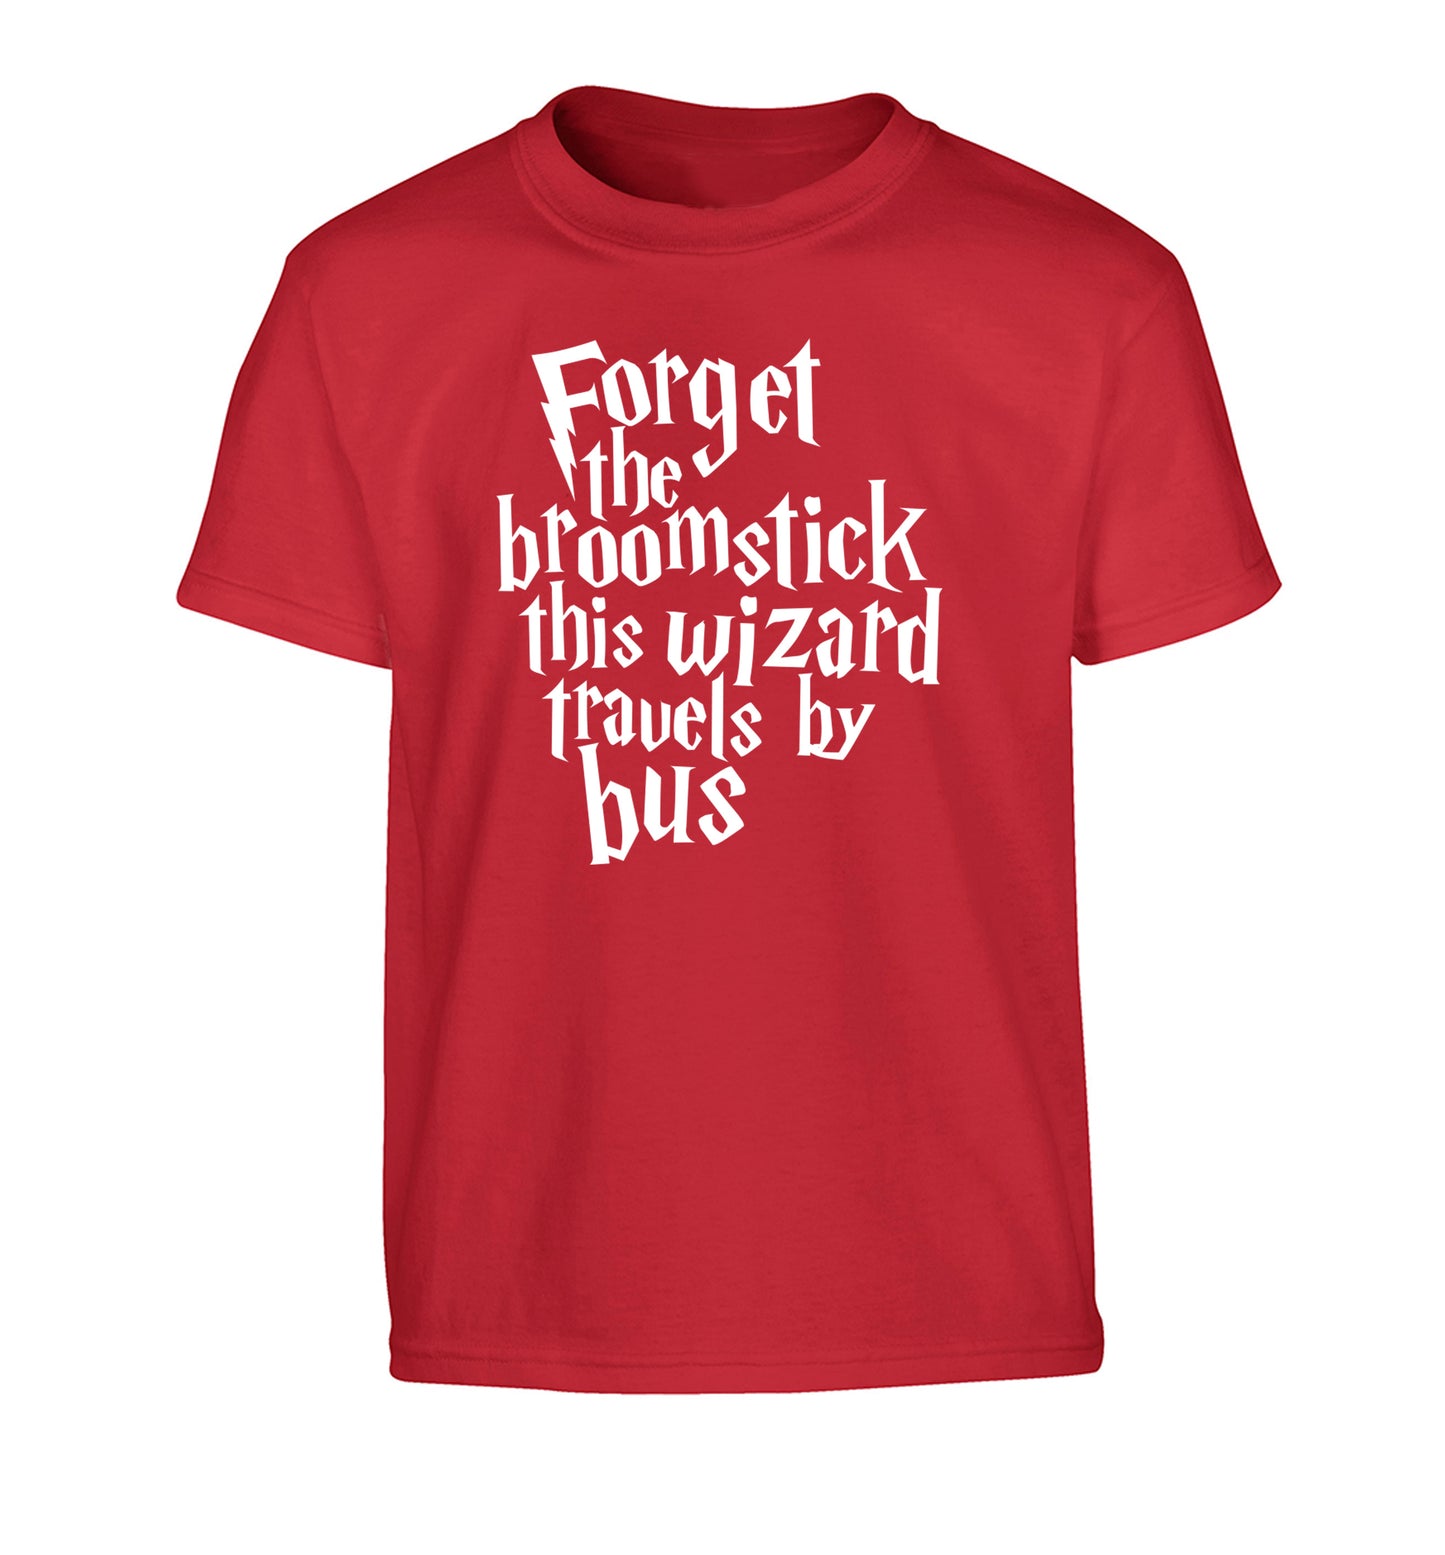 Forget the broomstick this wizard travels by bus Children's red Tshirt 12-14 Years